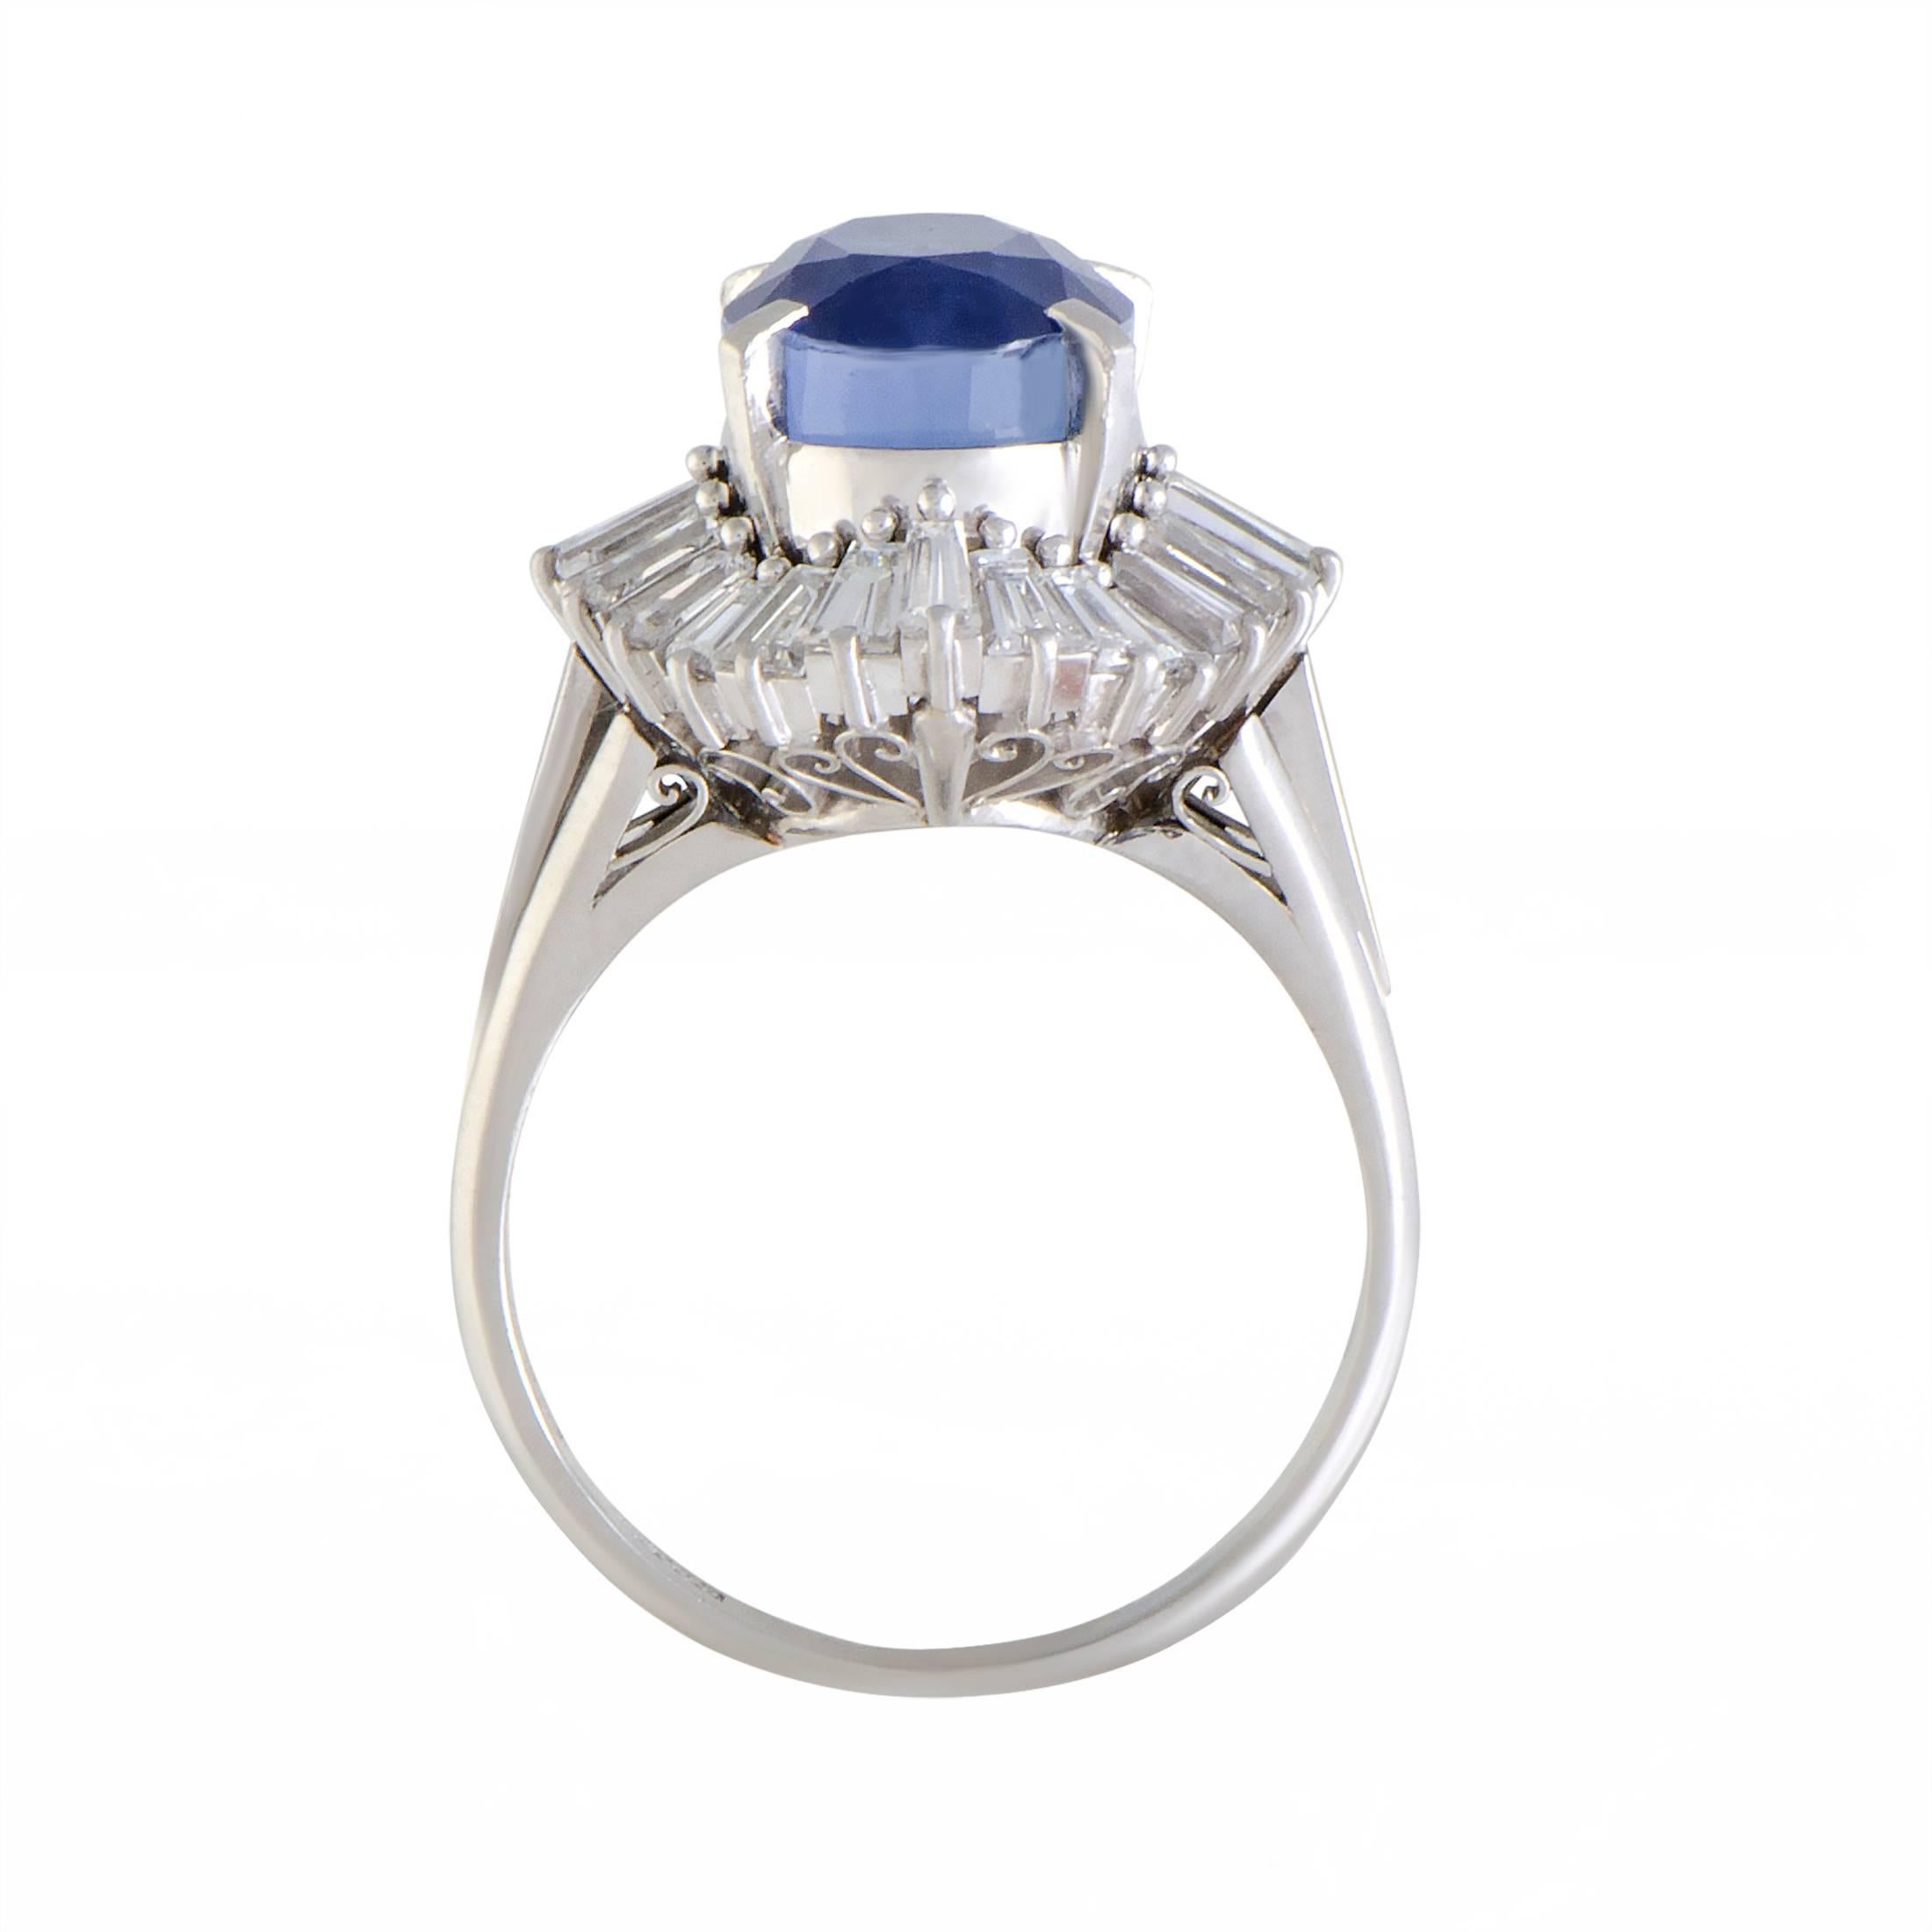 This gorgeous platinum ring features an enthralling design and compels with its feminine appeal. The beautiful ring has a 7.45ct alluring sapphire stone surrounded by 1.69ct of dazzling diamonds that immensely elevate the beauty of the remarkable